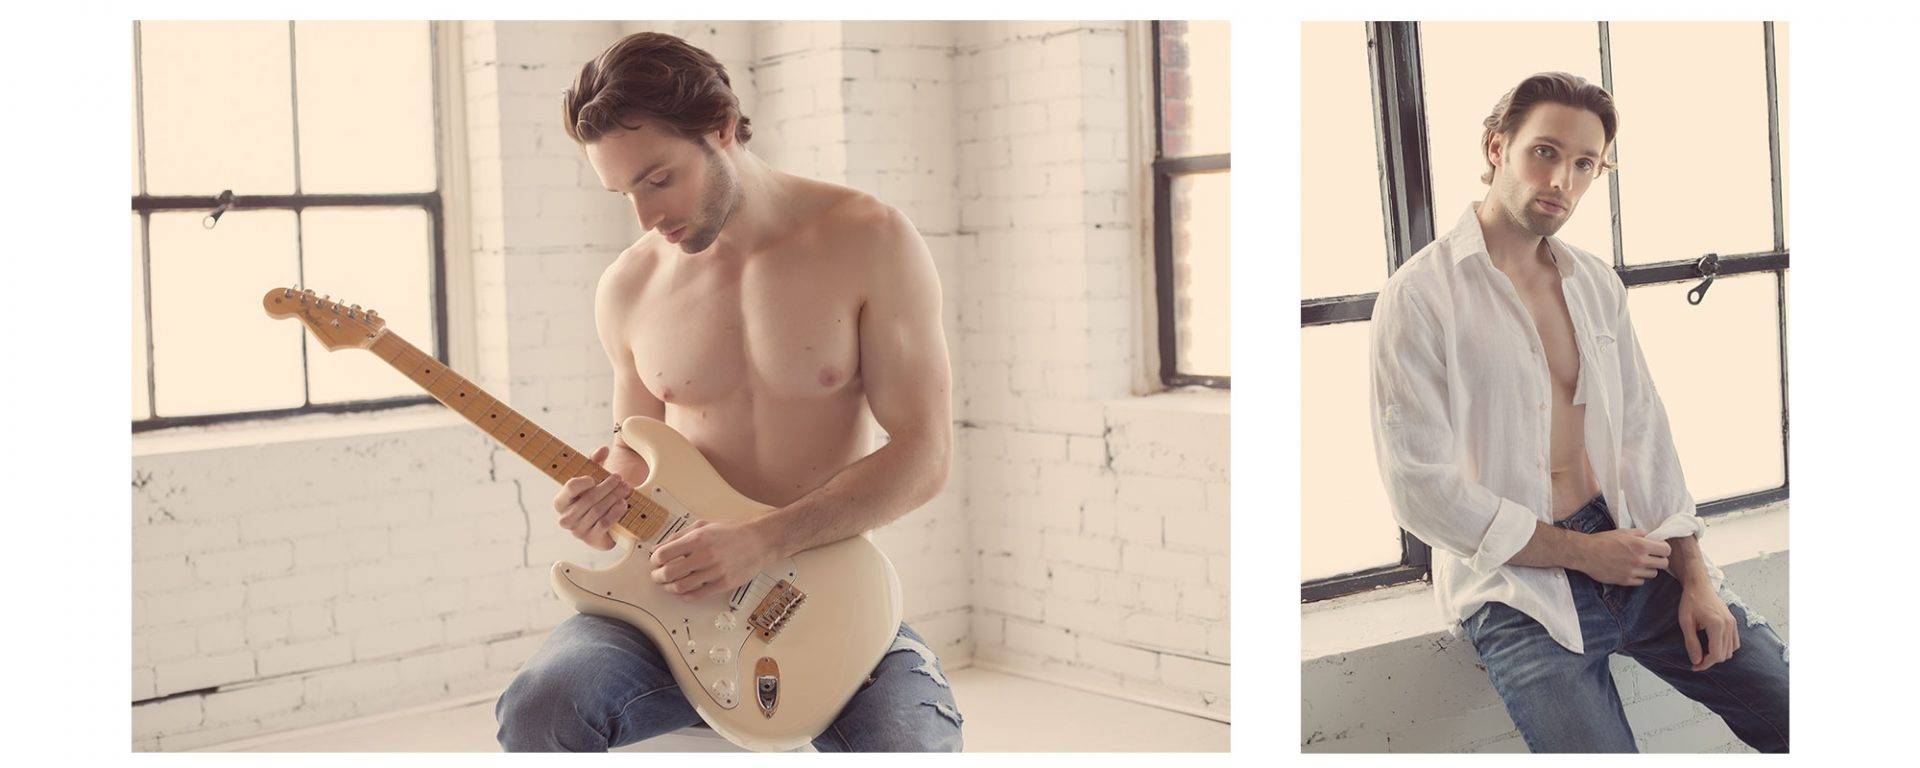 A man's portrait, he is playing his guitar shirtless.